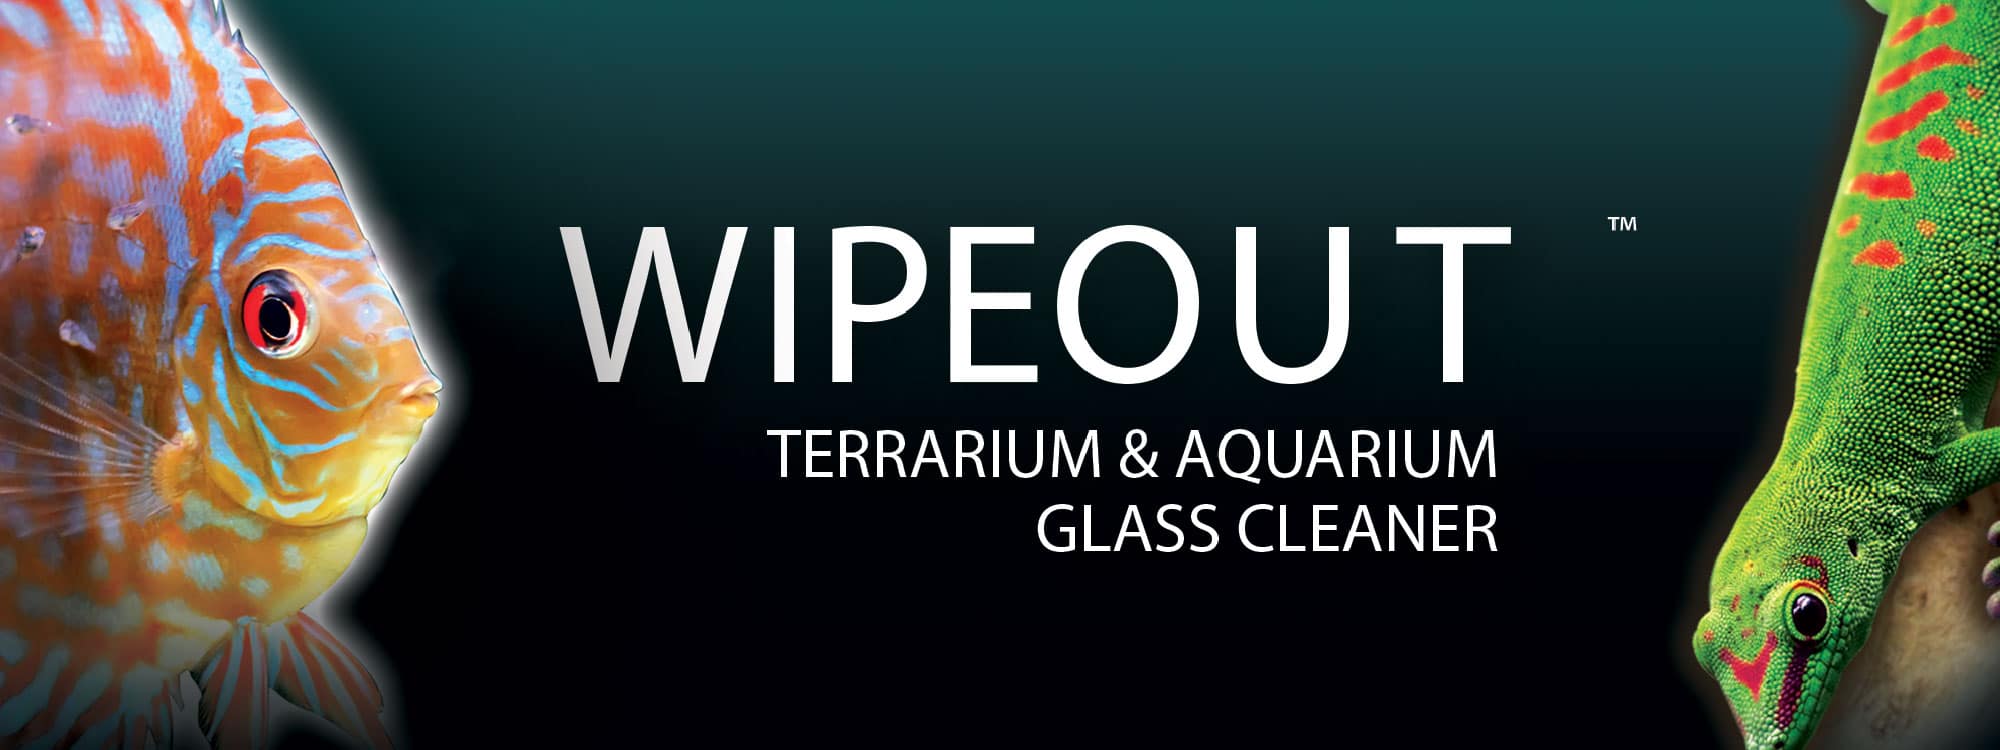 Eliminate mineral build-up and create a clear view into your habitat. This 100% plant-based glass cleaner removes light-blocking deposits without streaking. Perfect for terrariums or aquariums.